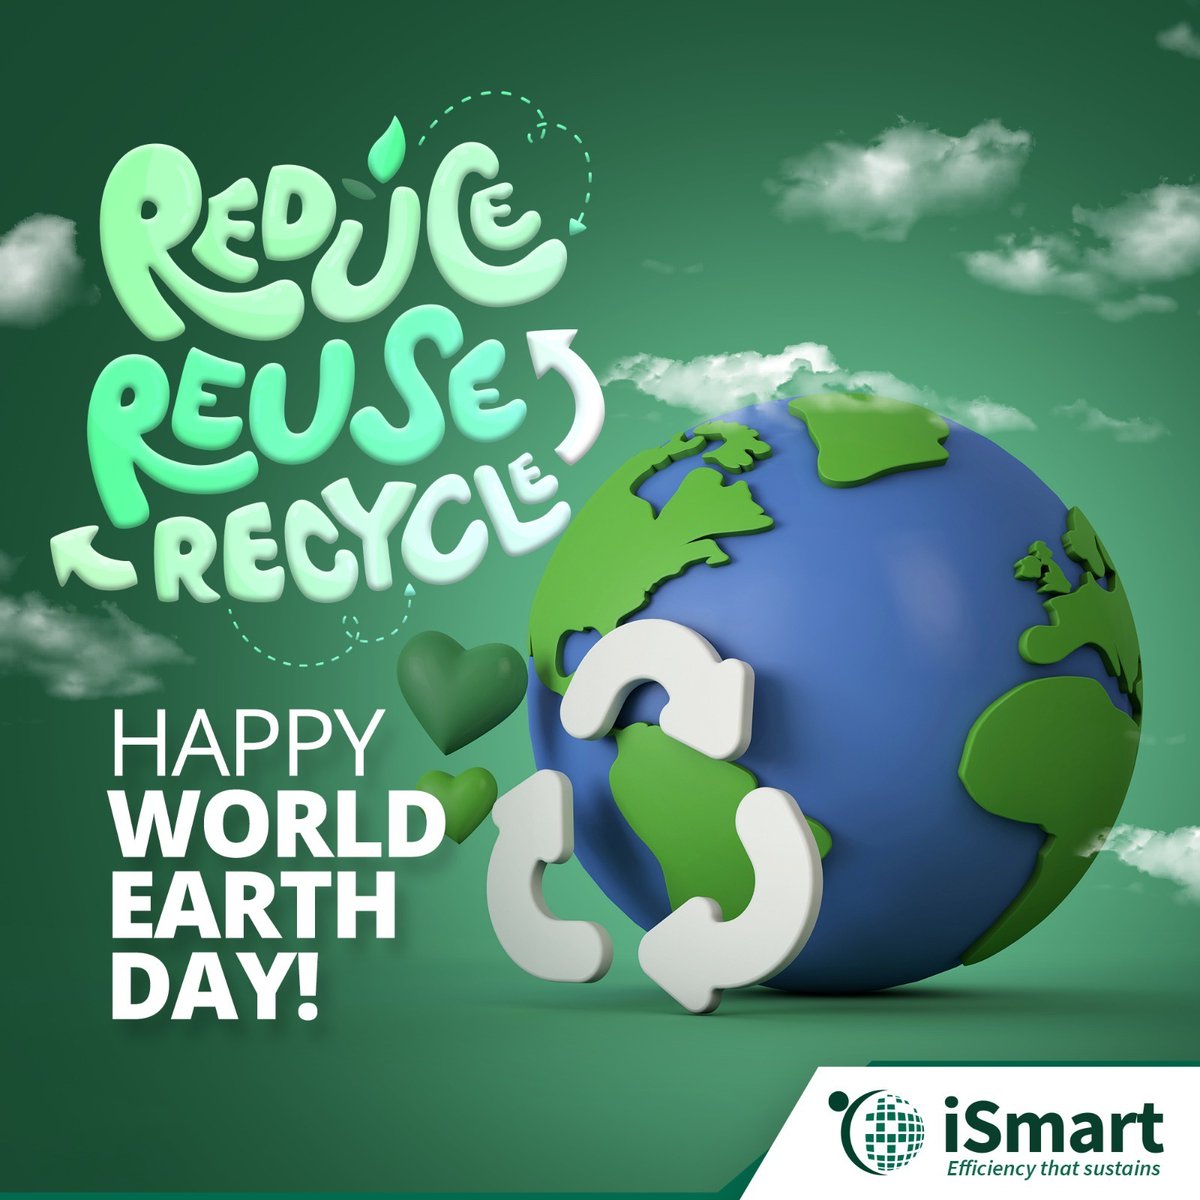 Reduce, reuse, recycle! On World Earth Day, let's commit to sustainable practices that minimise waste and protect our environment. Every small effort counts towards a healthier planet for all. Join ISMART in promoting a greener future. ♻️🌱

#savetheplanet #everylittlehelps